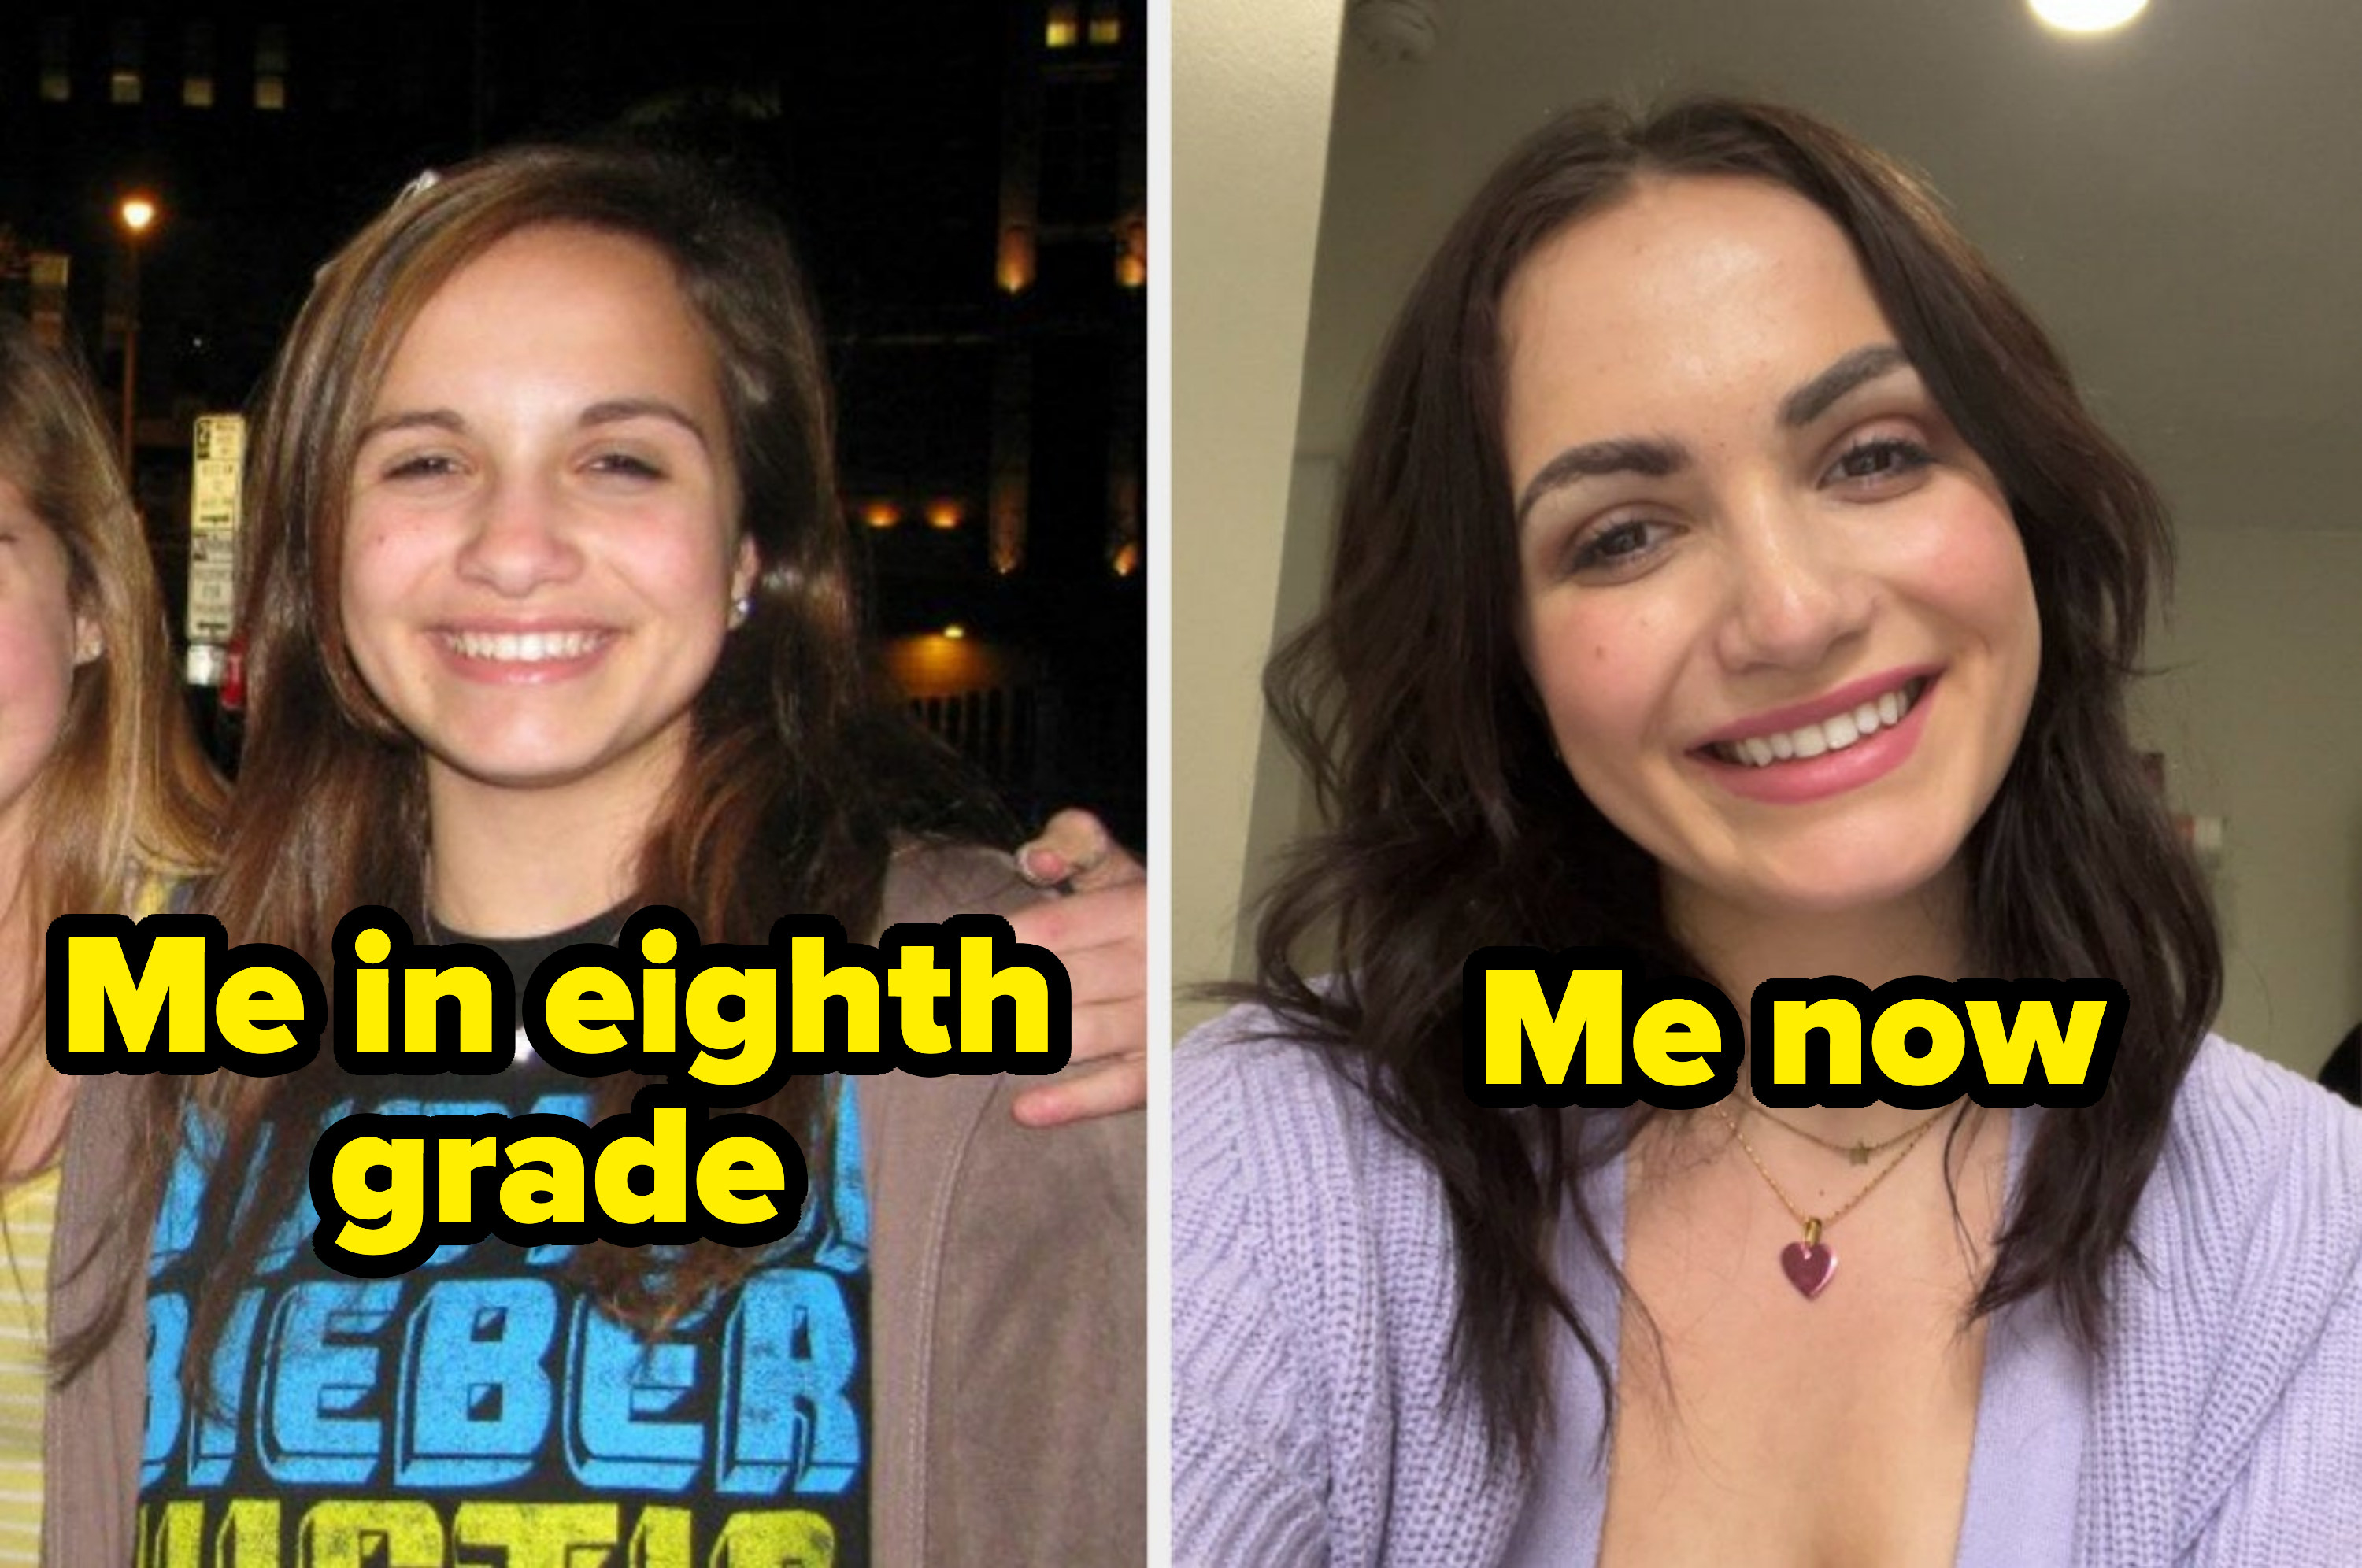 Side-by-sides of a smiling person, one with &quot;Me in eighth grade&quot; text and one with &quot;Me now&quot;